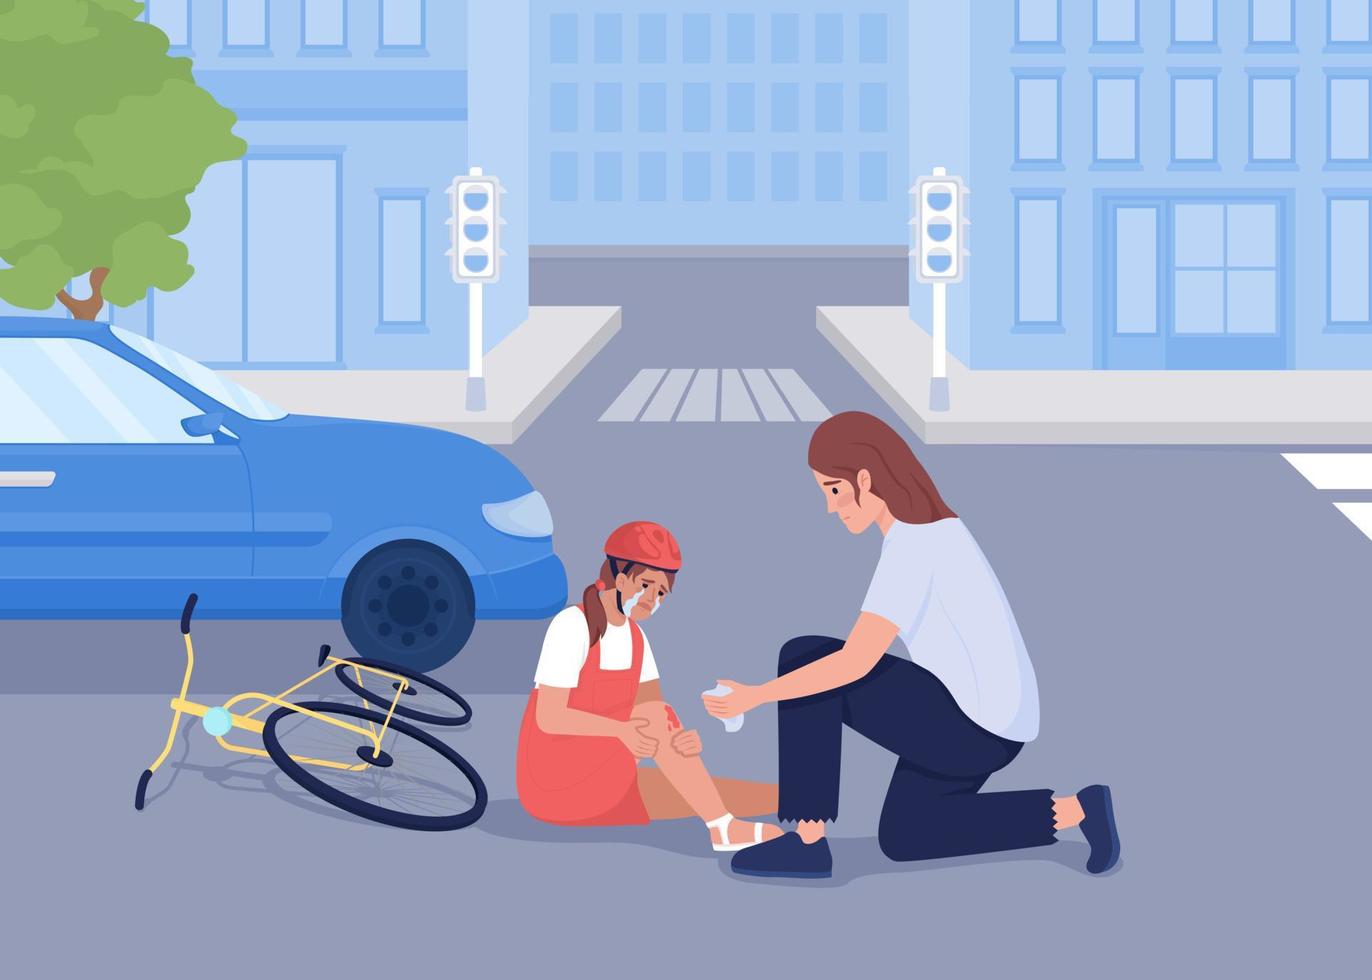 First aid in automobile accident flat color vector illustration. Woman helps crying little girl cyclist. Fully editable 2D simple cartoon characters with crossroad and traffic lights on background